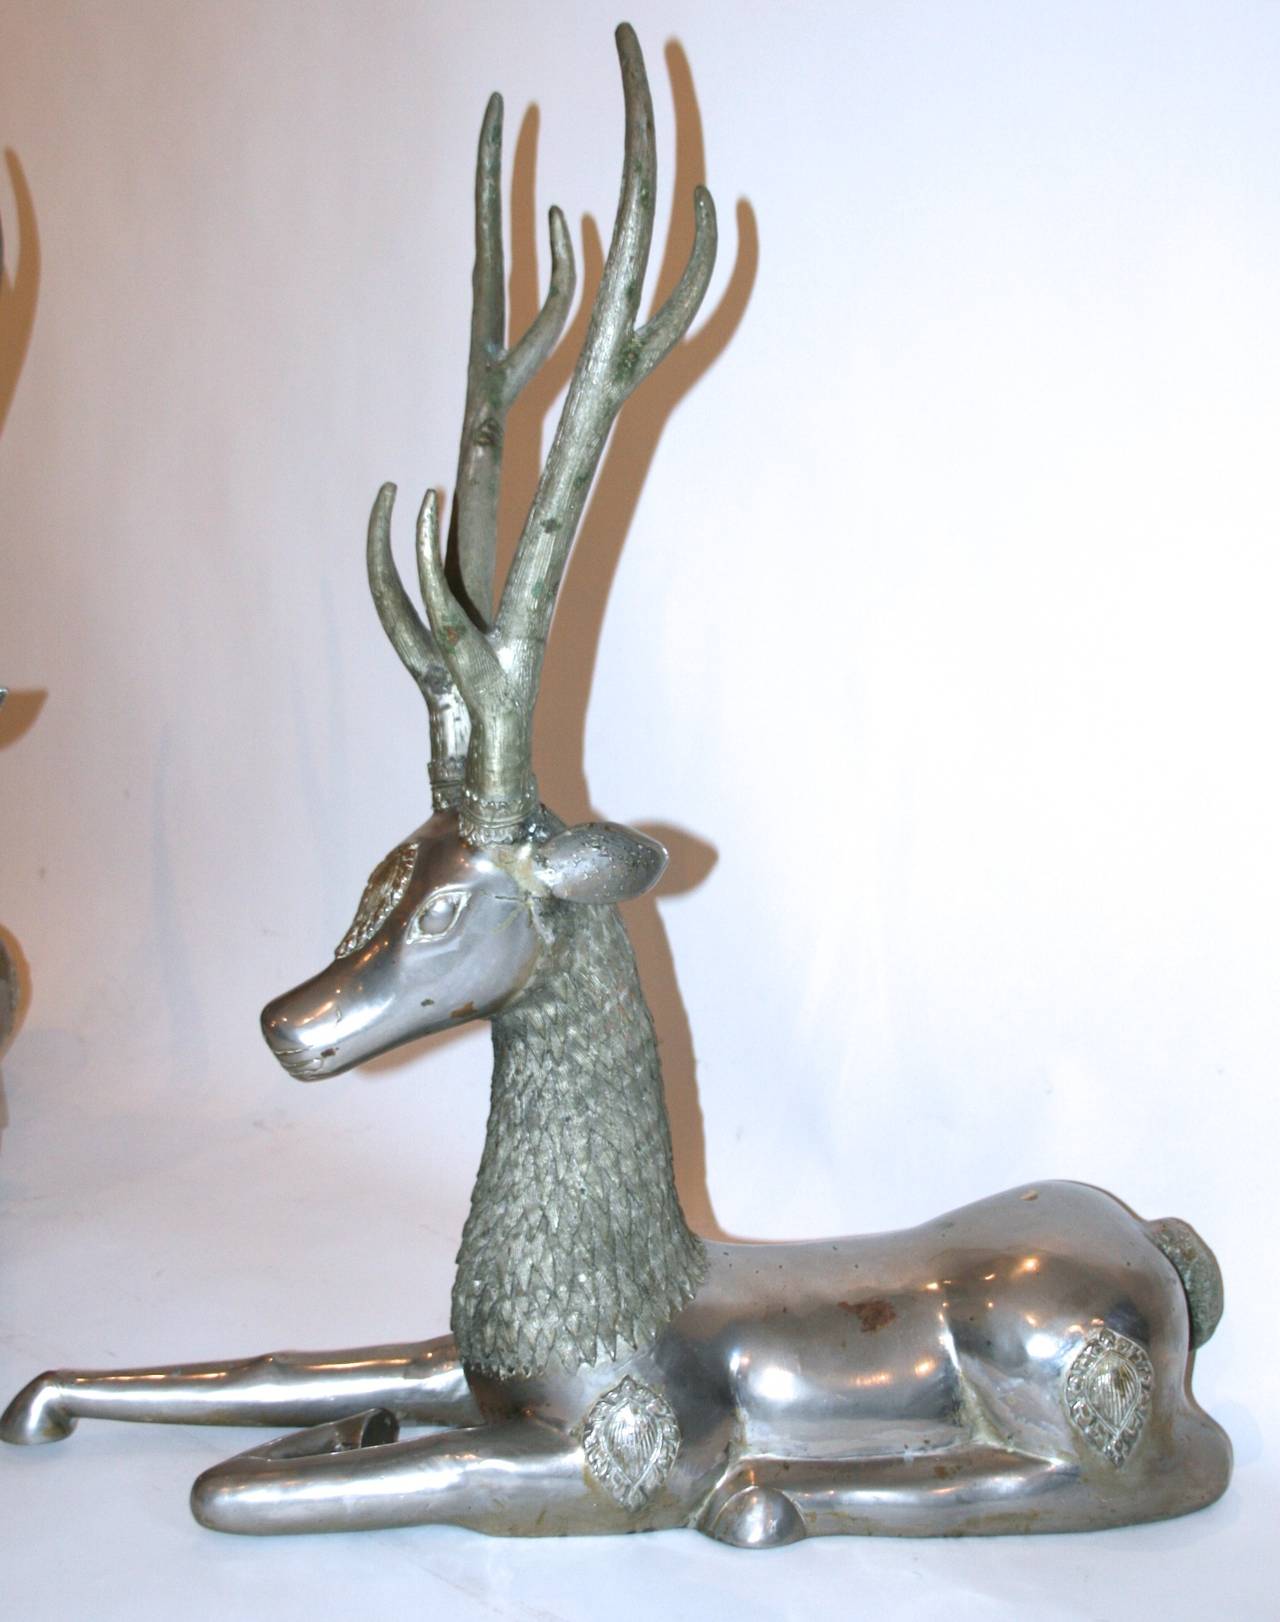 Great Britain (UK) Pair of Deer in the Style of Anthony Redmile, Silver Bronze, circa 1970